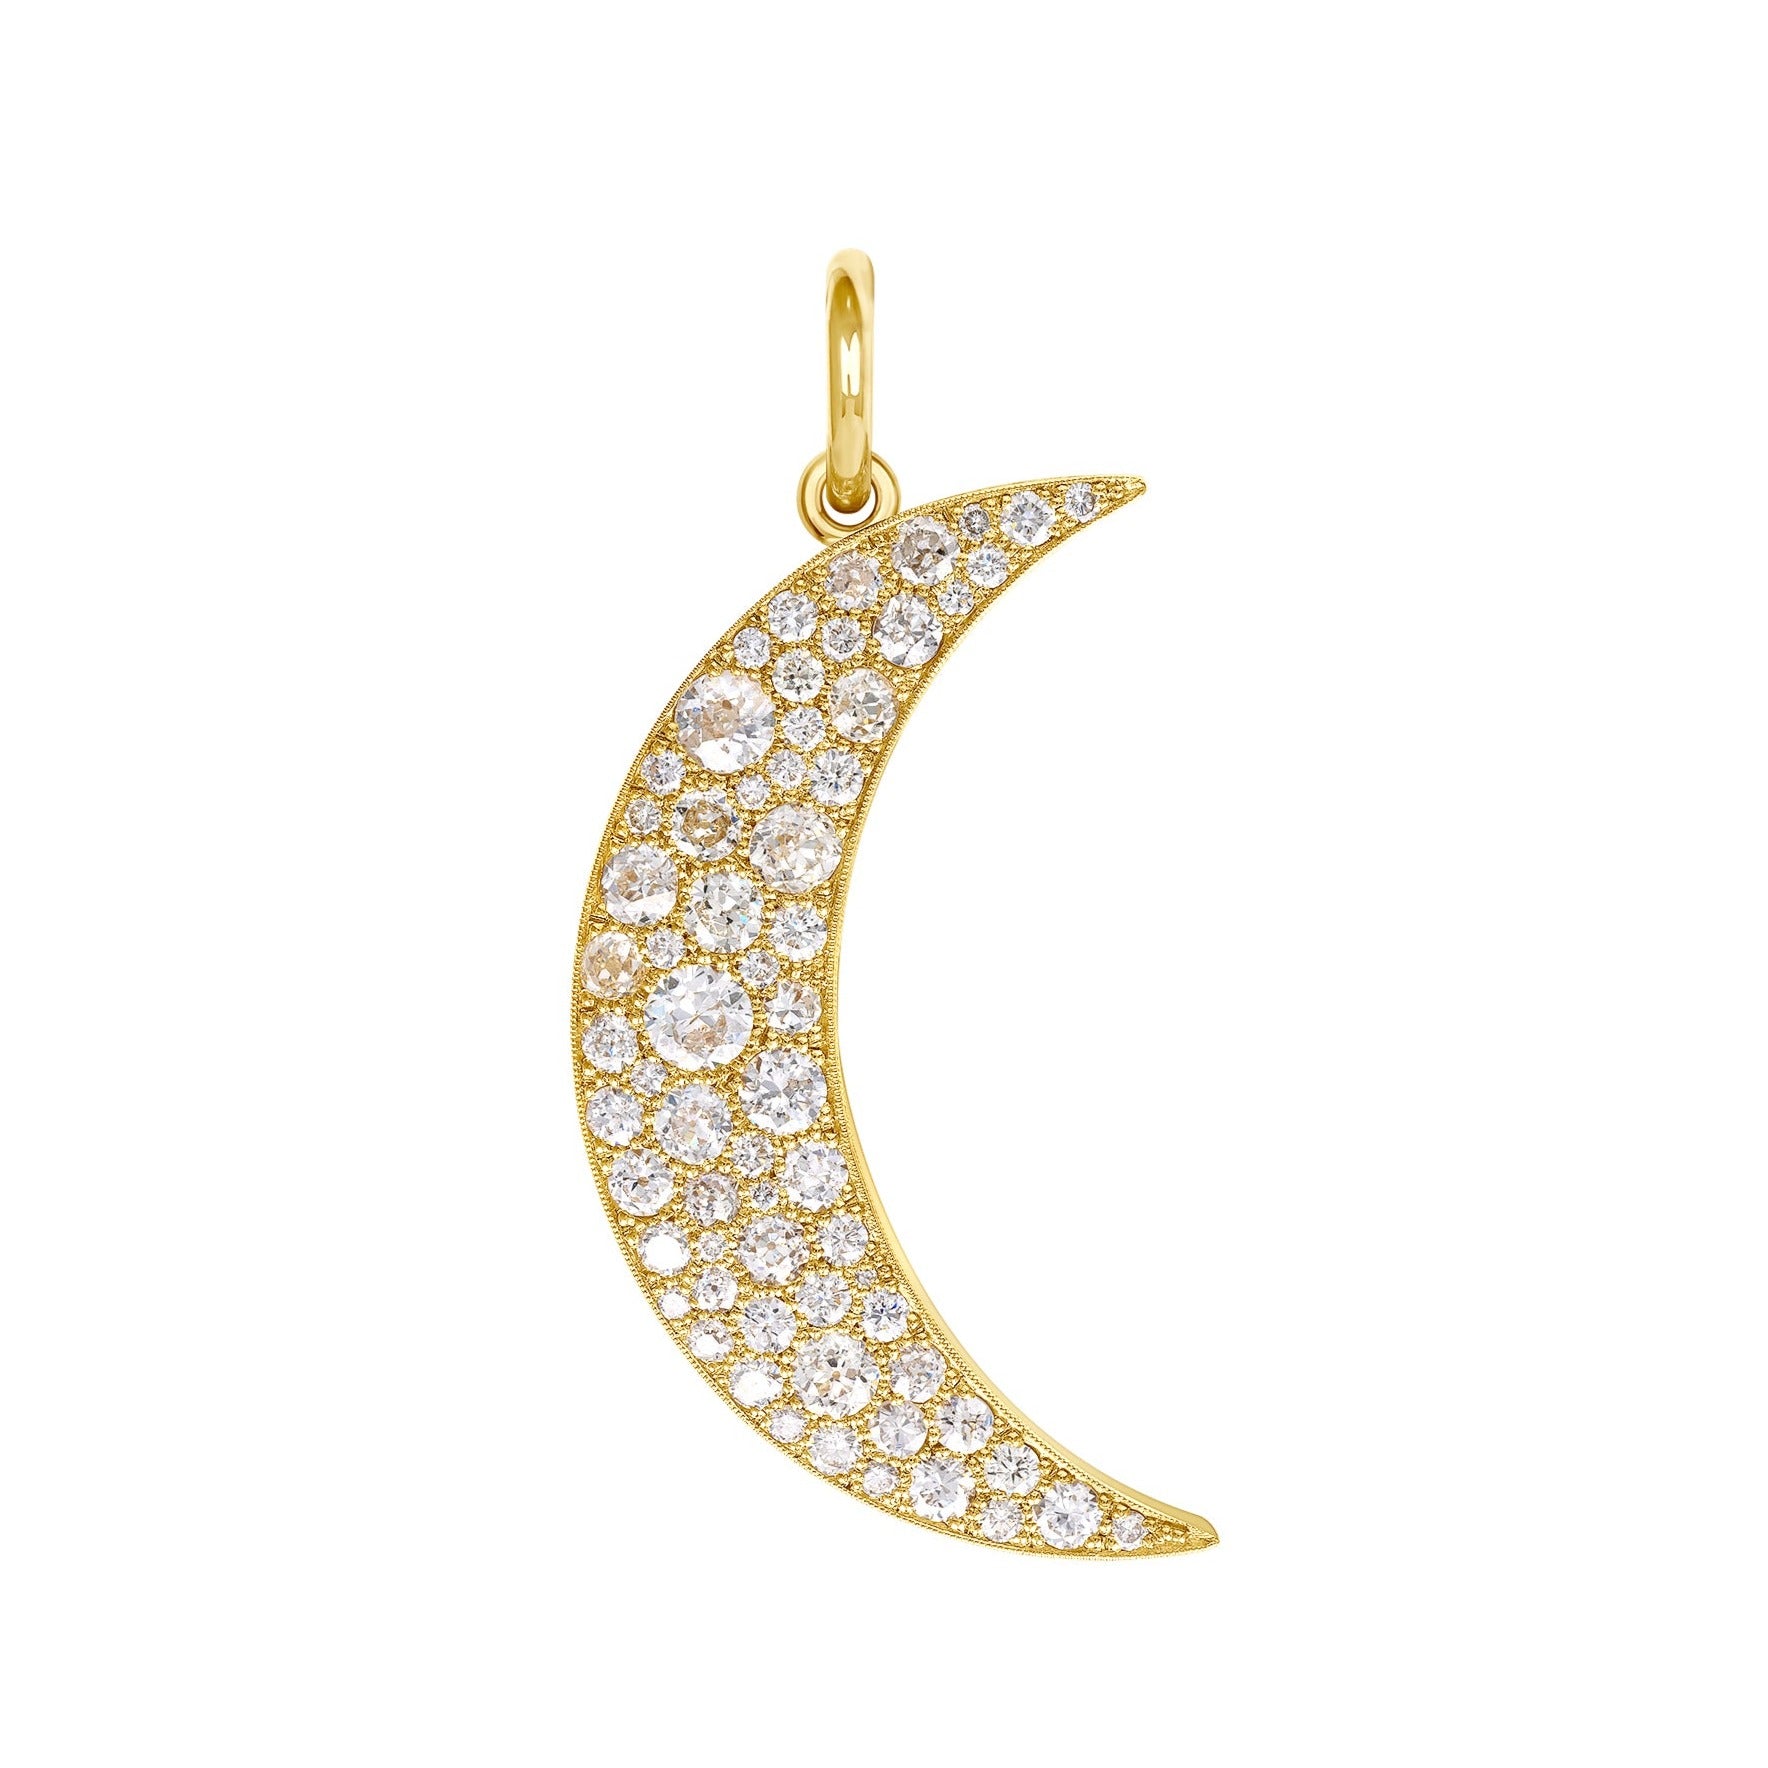 SINGLE STONE LARGE COBBLESTONE MOON PENDANT featuring Approximately 4.20ctw varying old cut and round brilliant cut diamonds set in a handcrafted 18K yellow gold crescent moon shaped pendant. Available in an oxidized or polished finish.